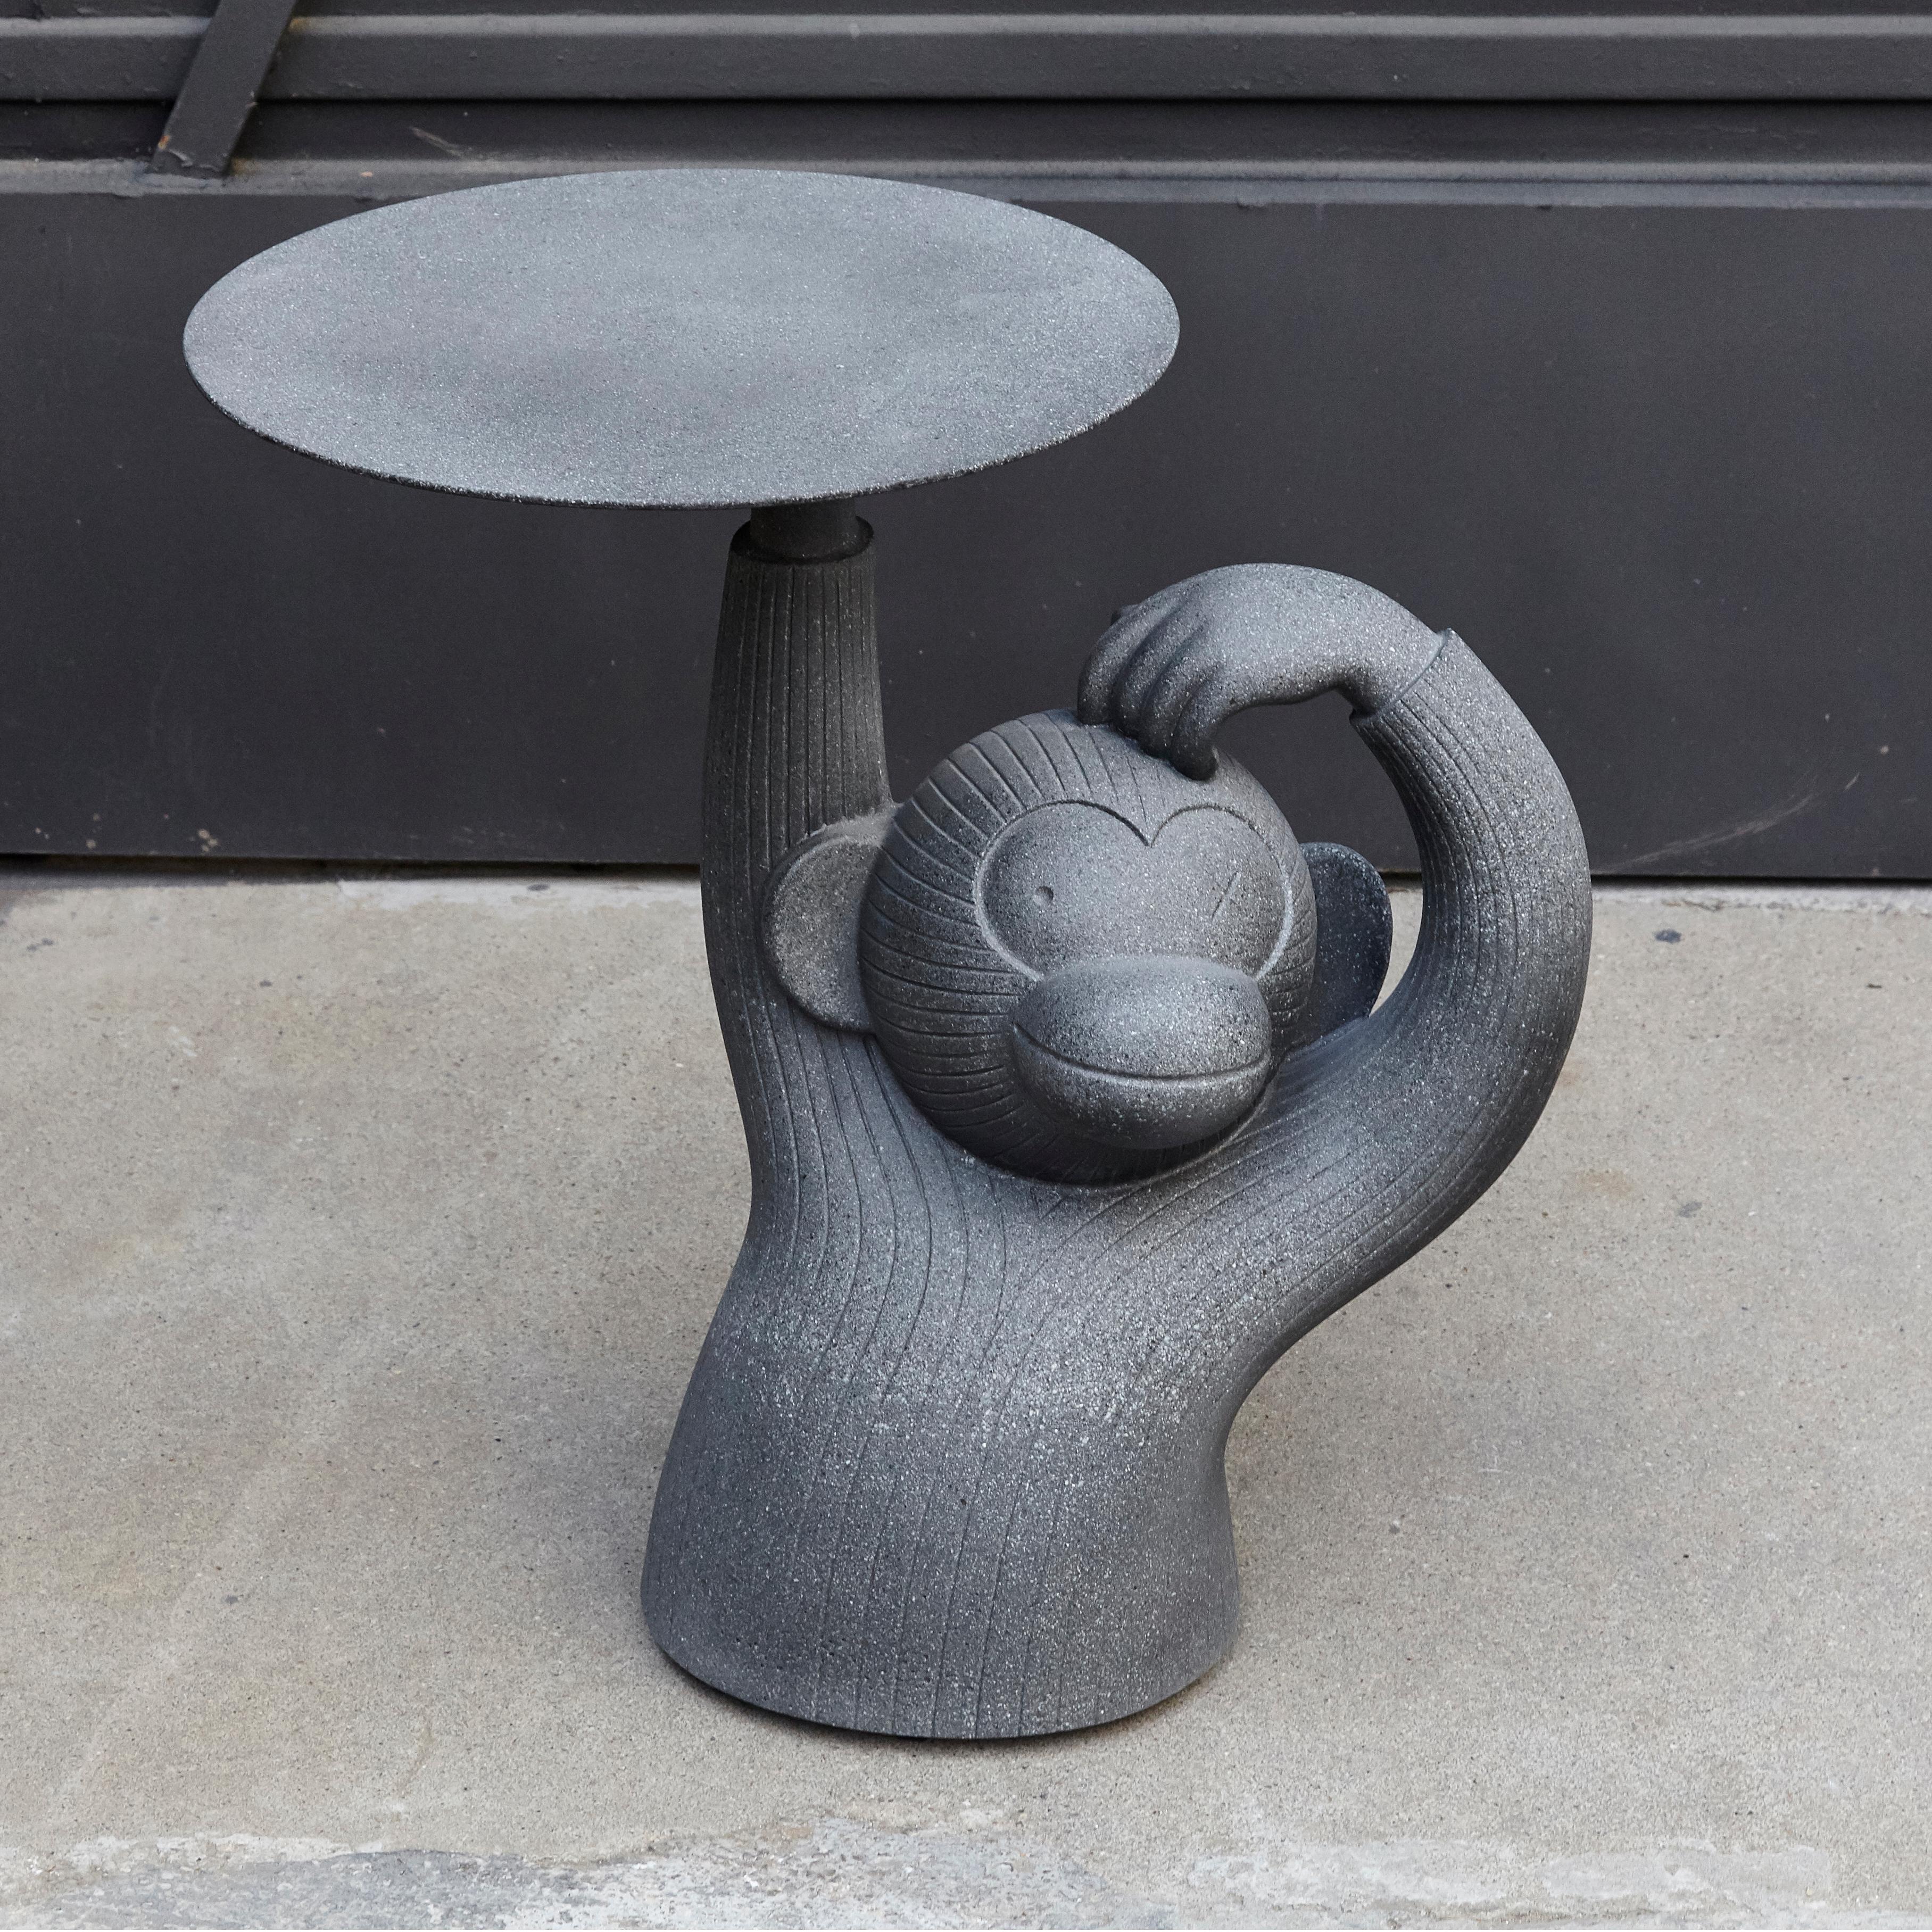 Monkey side table. Design by Jaime Hayon, 2016
Manufactured by BD Barcelona.

Side table in one solid architectural concrete in grey. 
Includes regulatory glides.

Has some wear consistent of age and use.